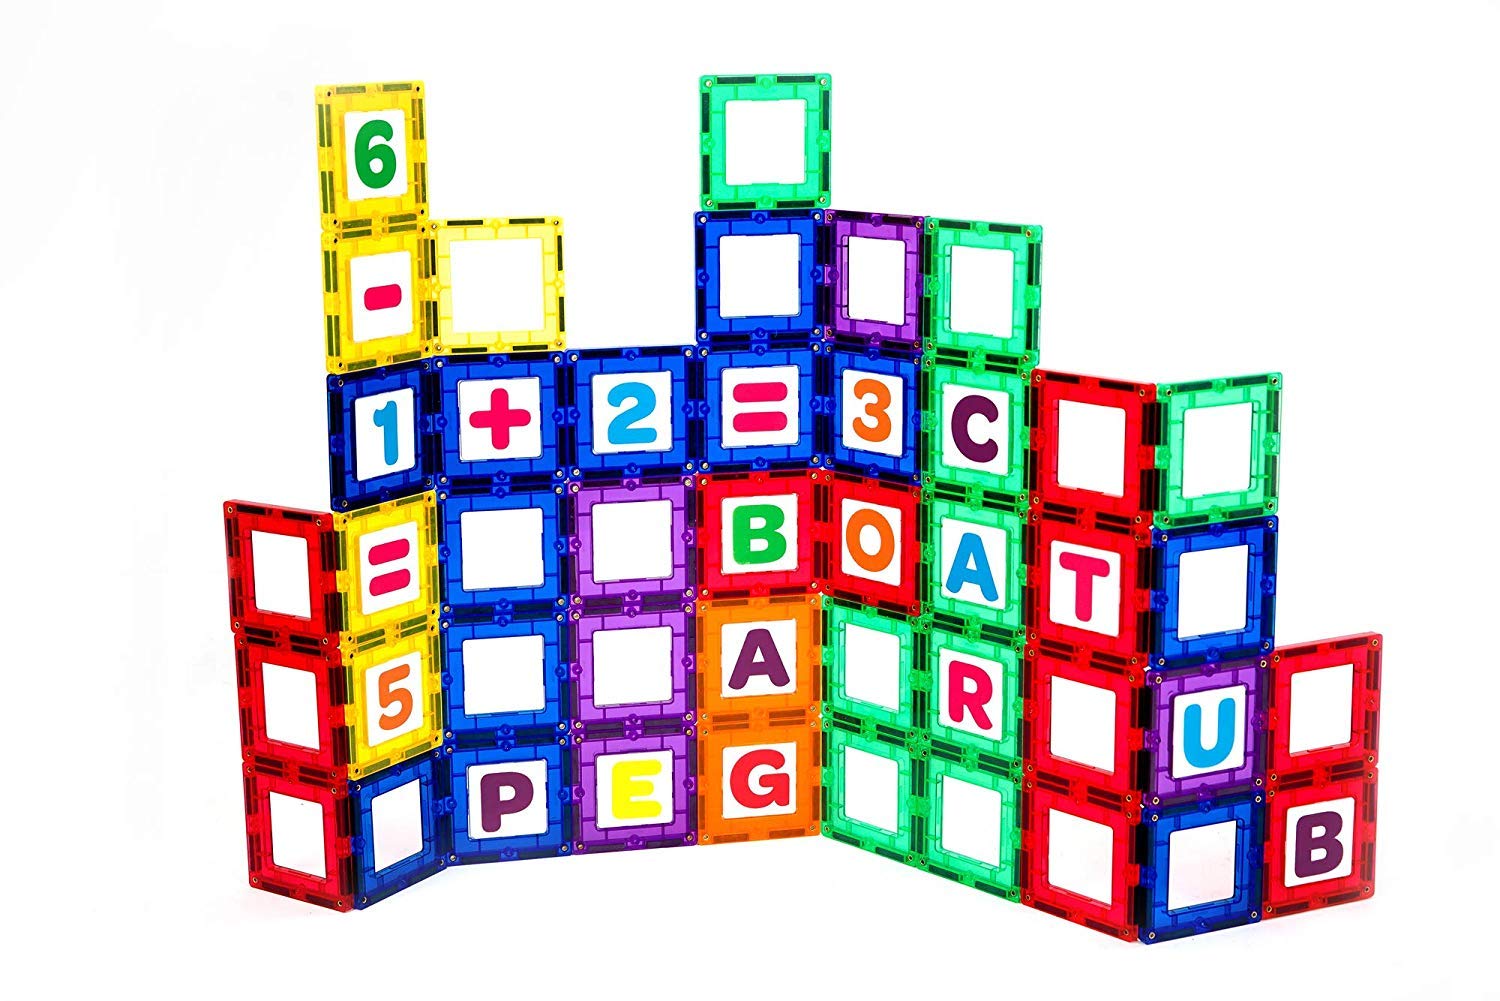 80-Piece Playmags Magnetic Tile Building Set: Educational Clickins Kit: 40 Windows & 40 Letters & Numbers $21.82 w/ Prime shipping